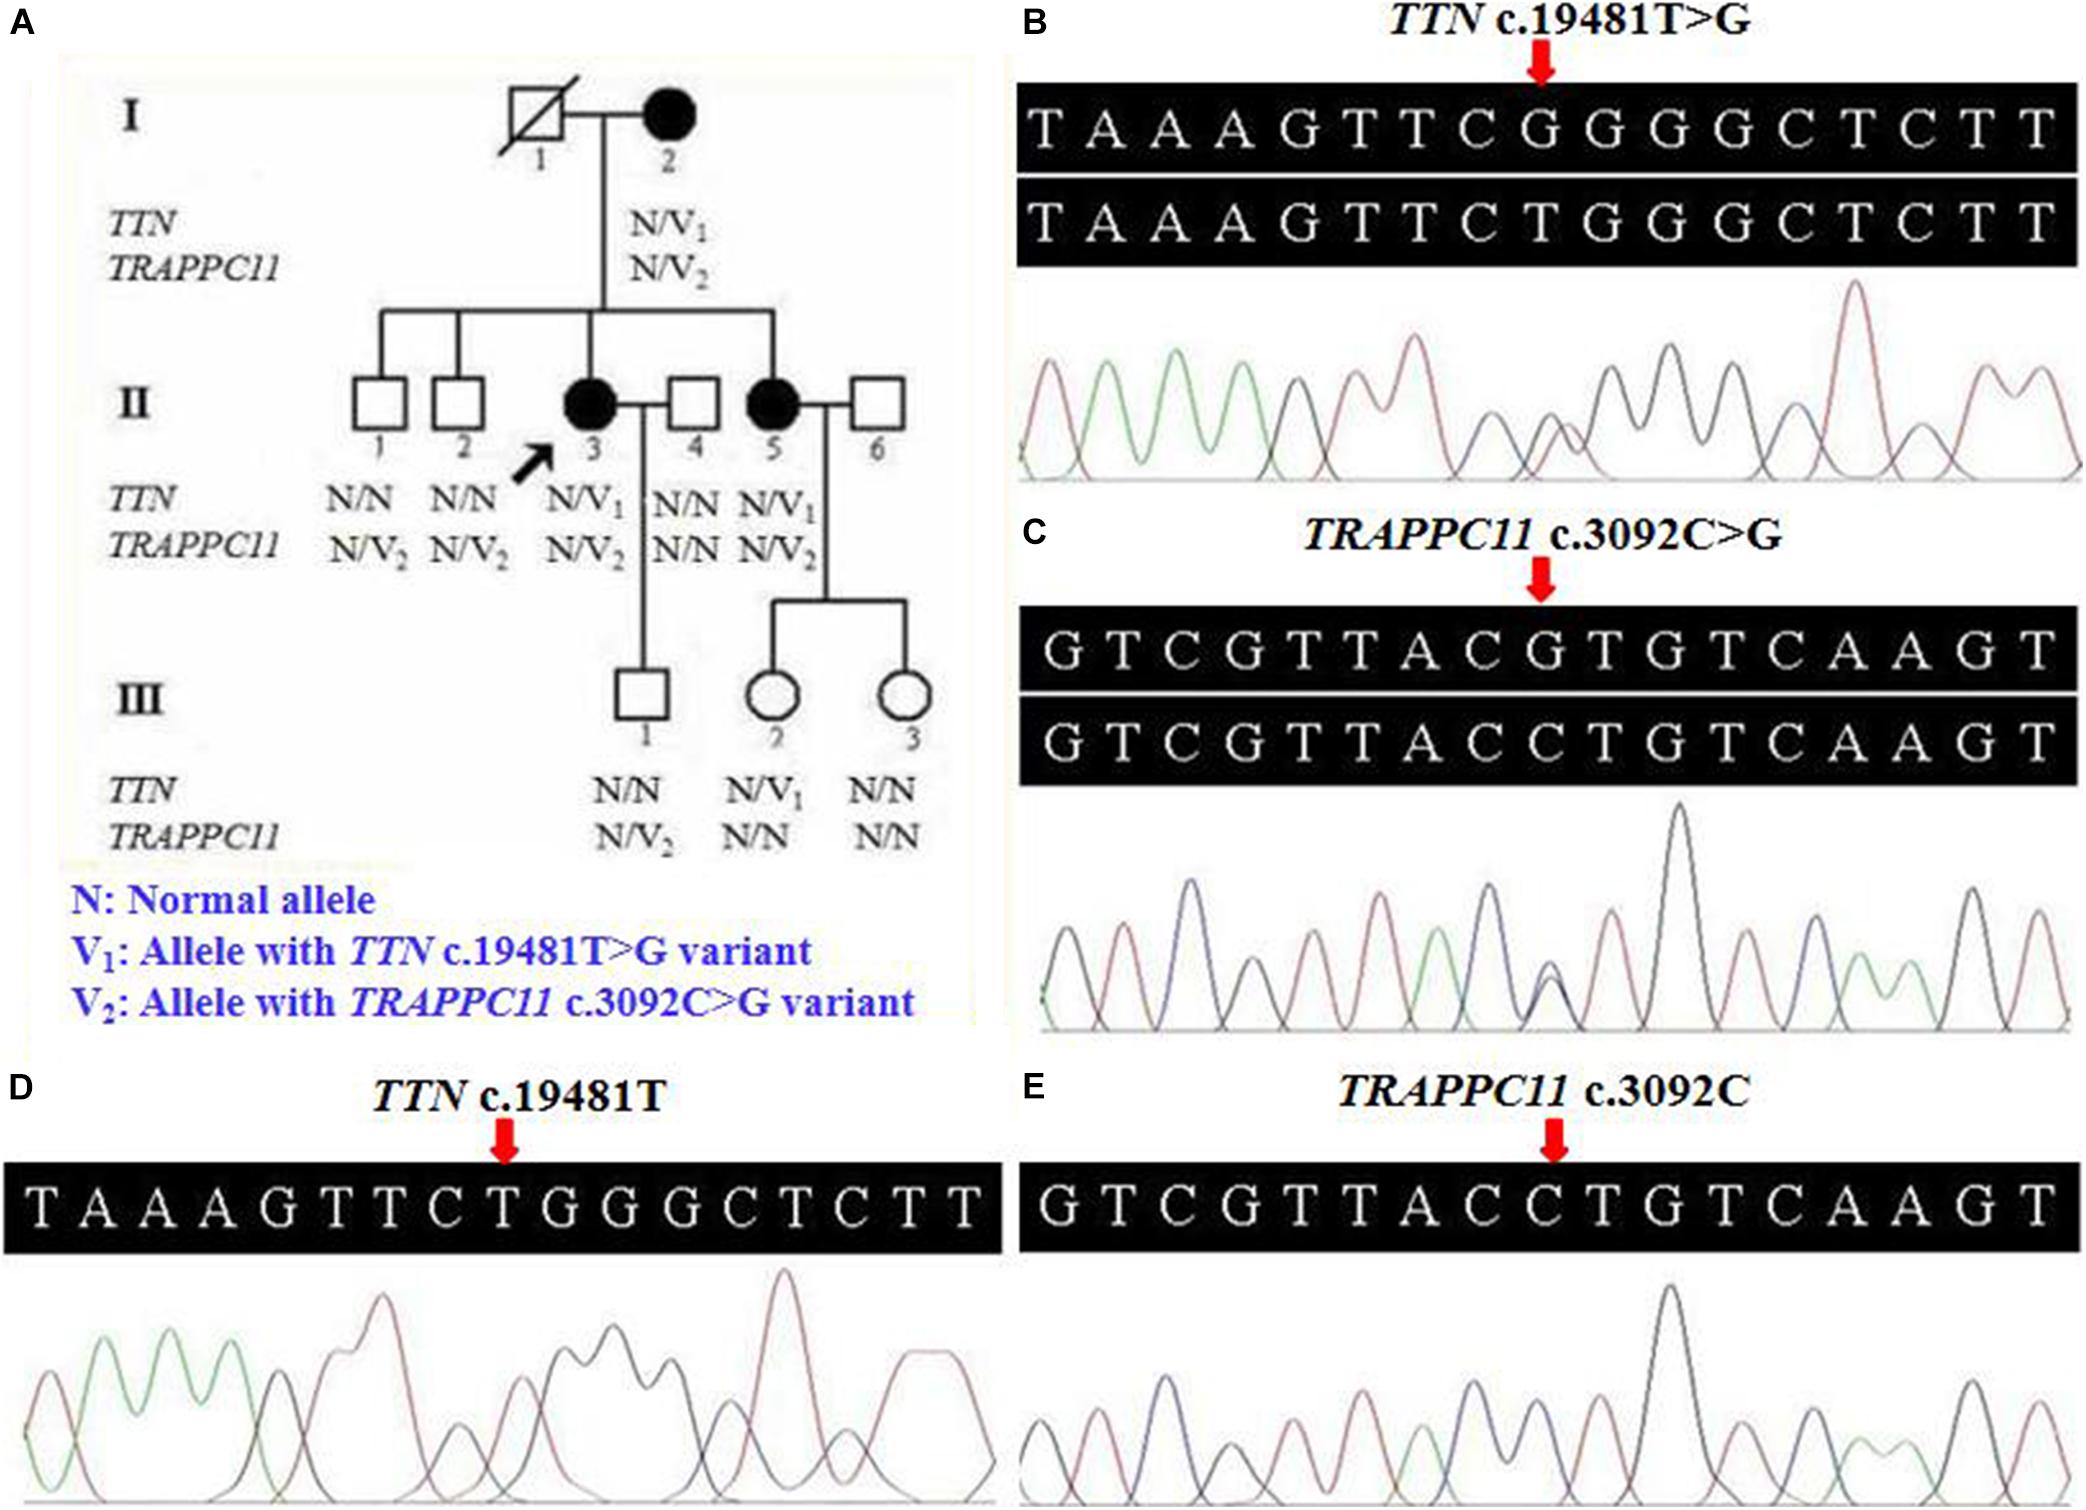 Frontiers Digenic Variants In The Ttn And Trappc11 Genes Co Segregating With A Limb Girdle Muscular Dystrophy In A Han Chinese Family Neuroscience